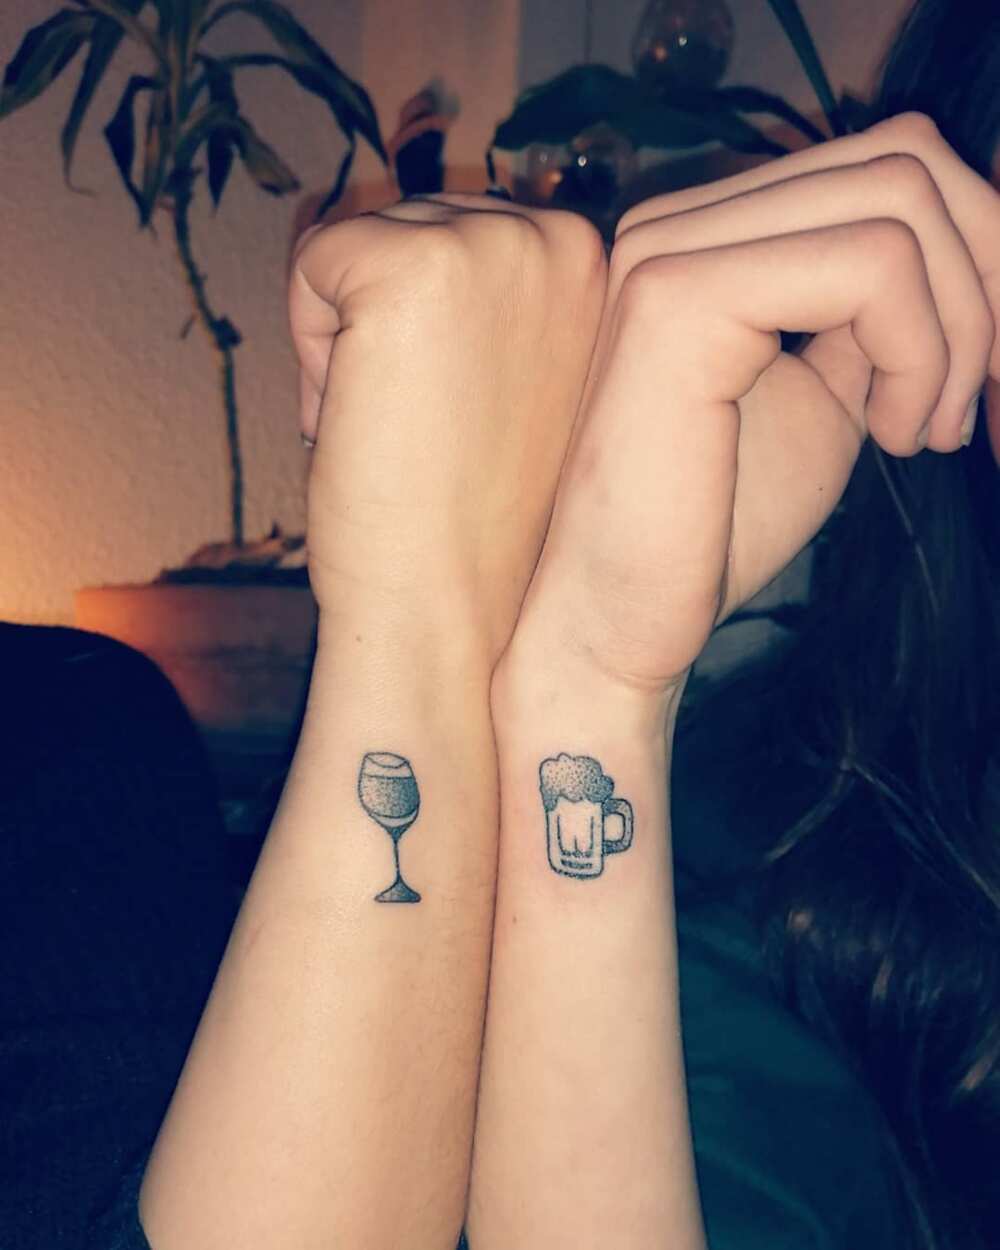 Friendship tattoos: best tattoo ideas for you and your bff 